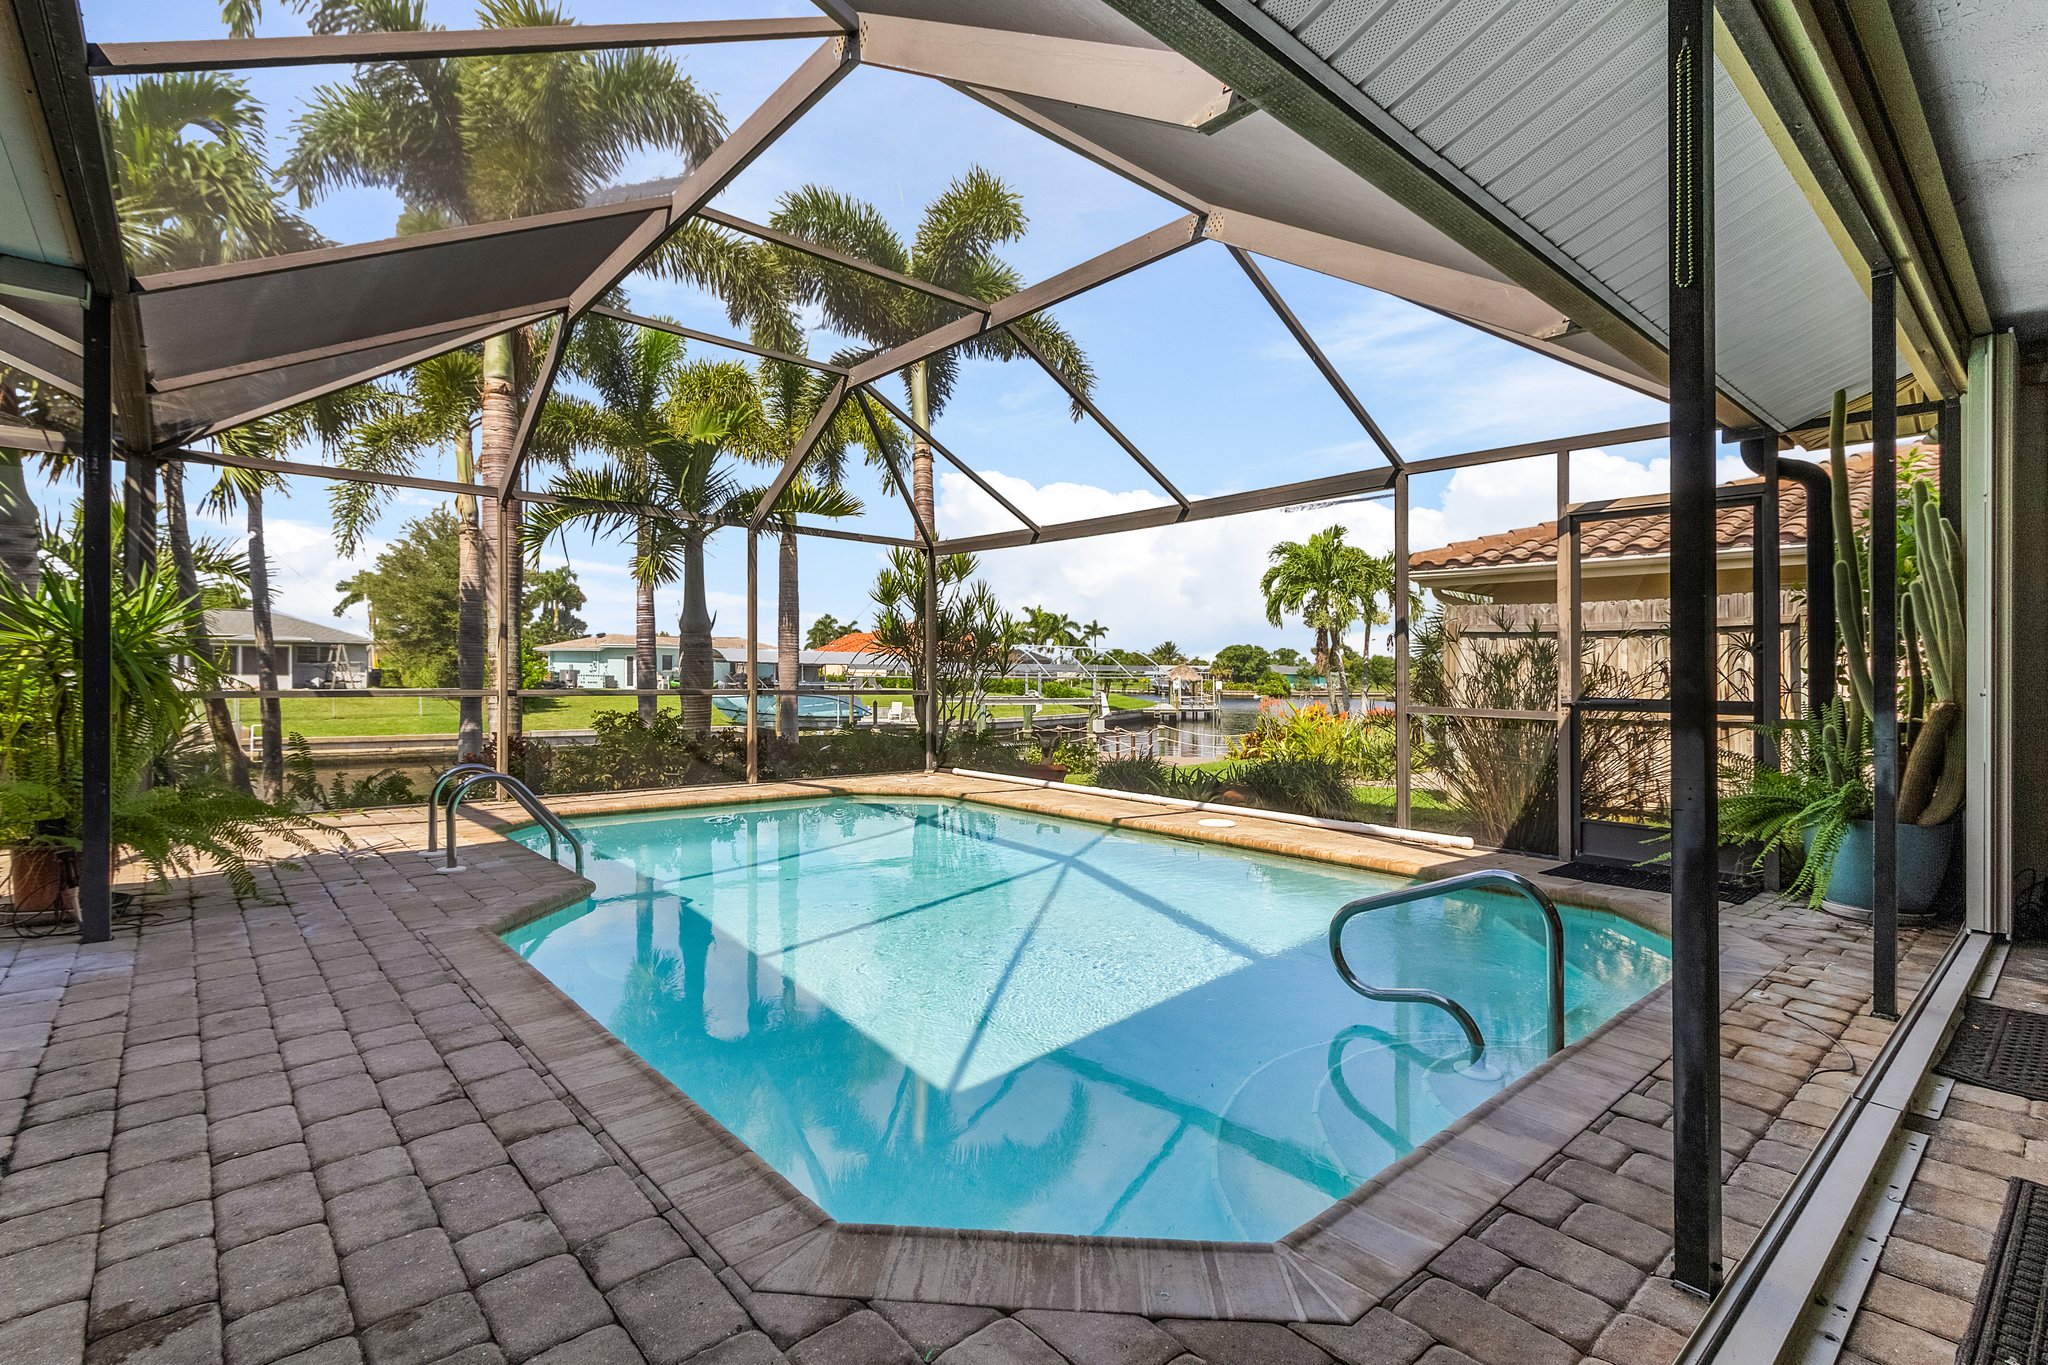 Property Image 2 - Little’s Slice of Heaven, Cape Coral